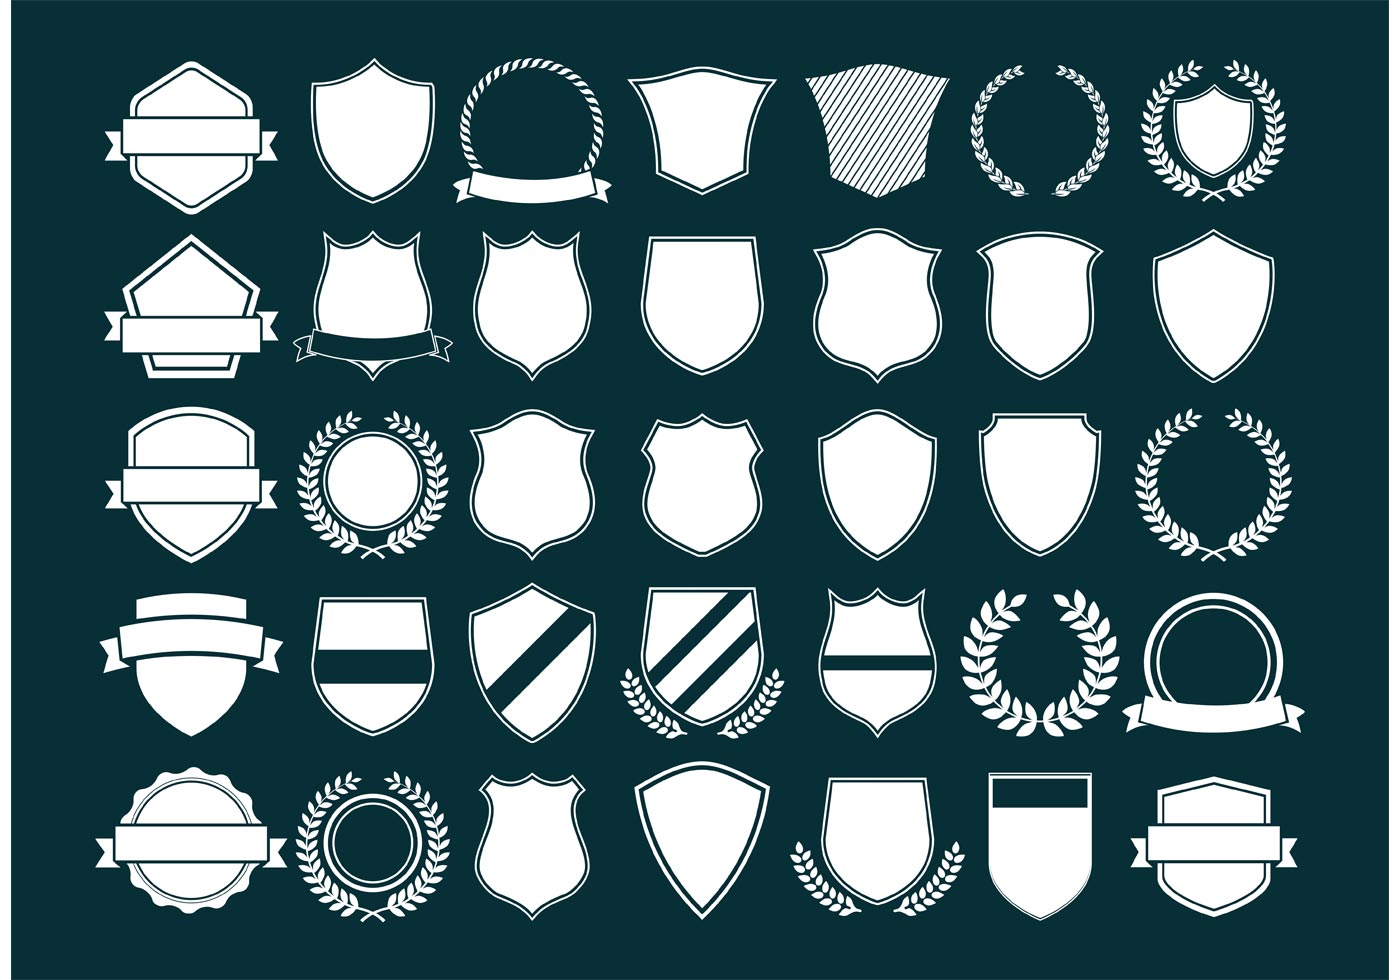 Vector Crest and Shields - Download Free Vector Art, Stock Graphics